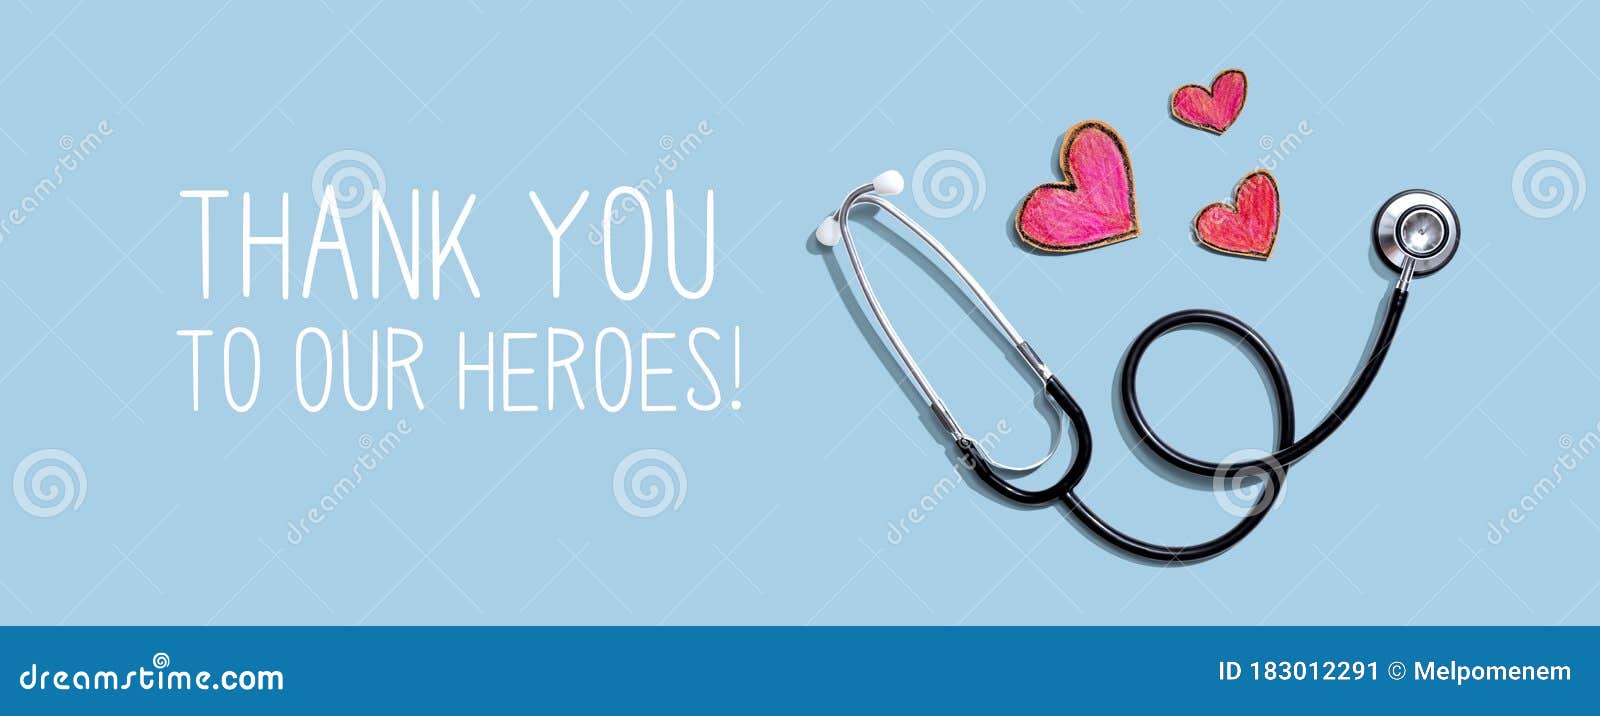 thank you to our heroes message with stethoscope and hearts